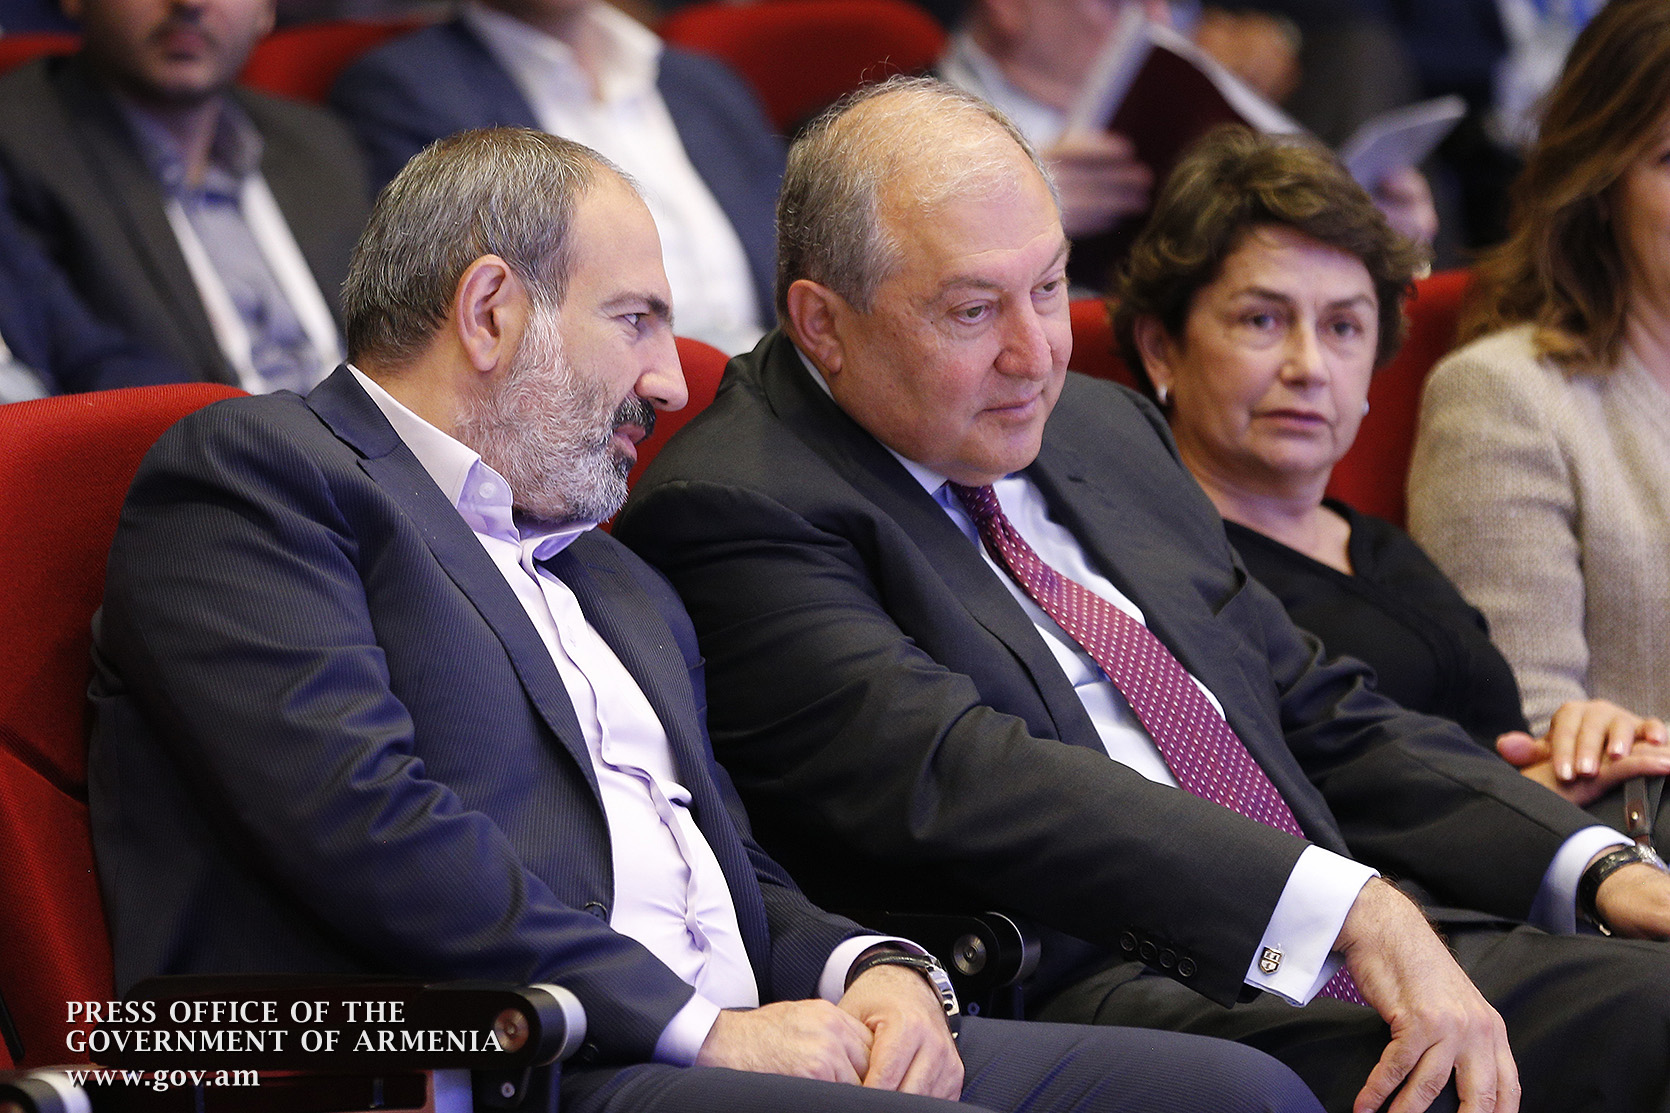 “This century ushers in the glorious revival of the Armenian nation” – PM Attends Summit of Minds